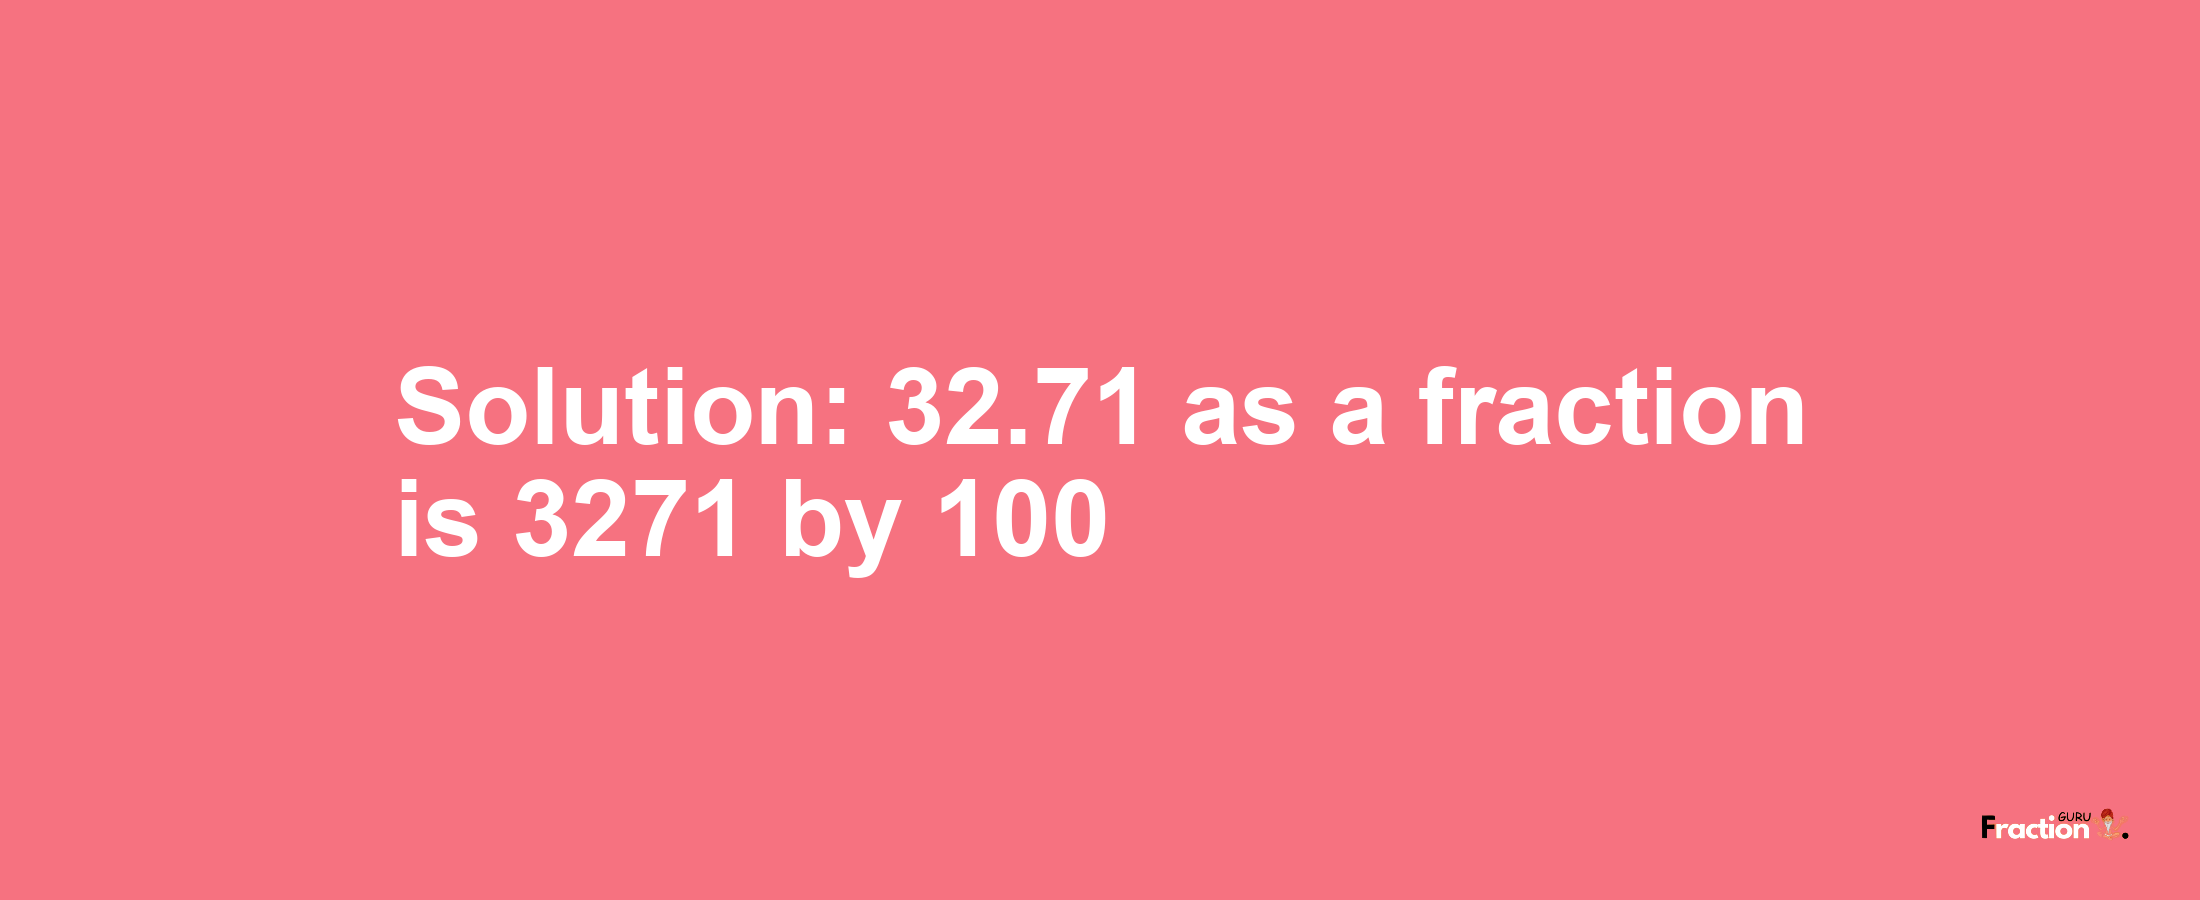 Solution:32.71 as a fraction is 3271/100